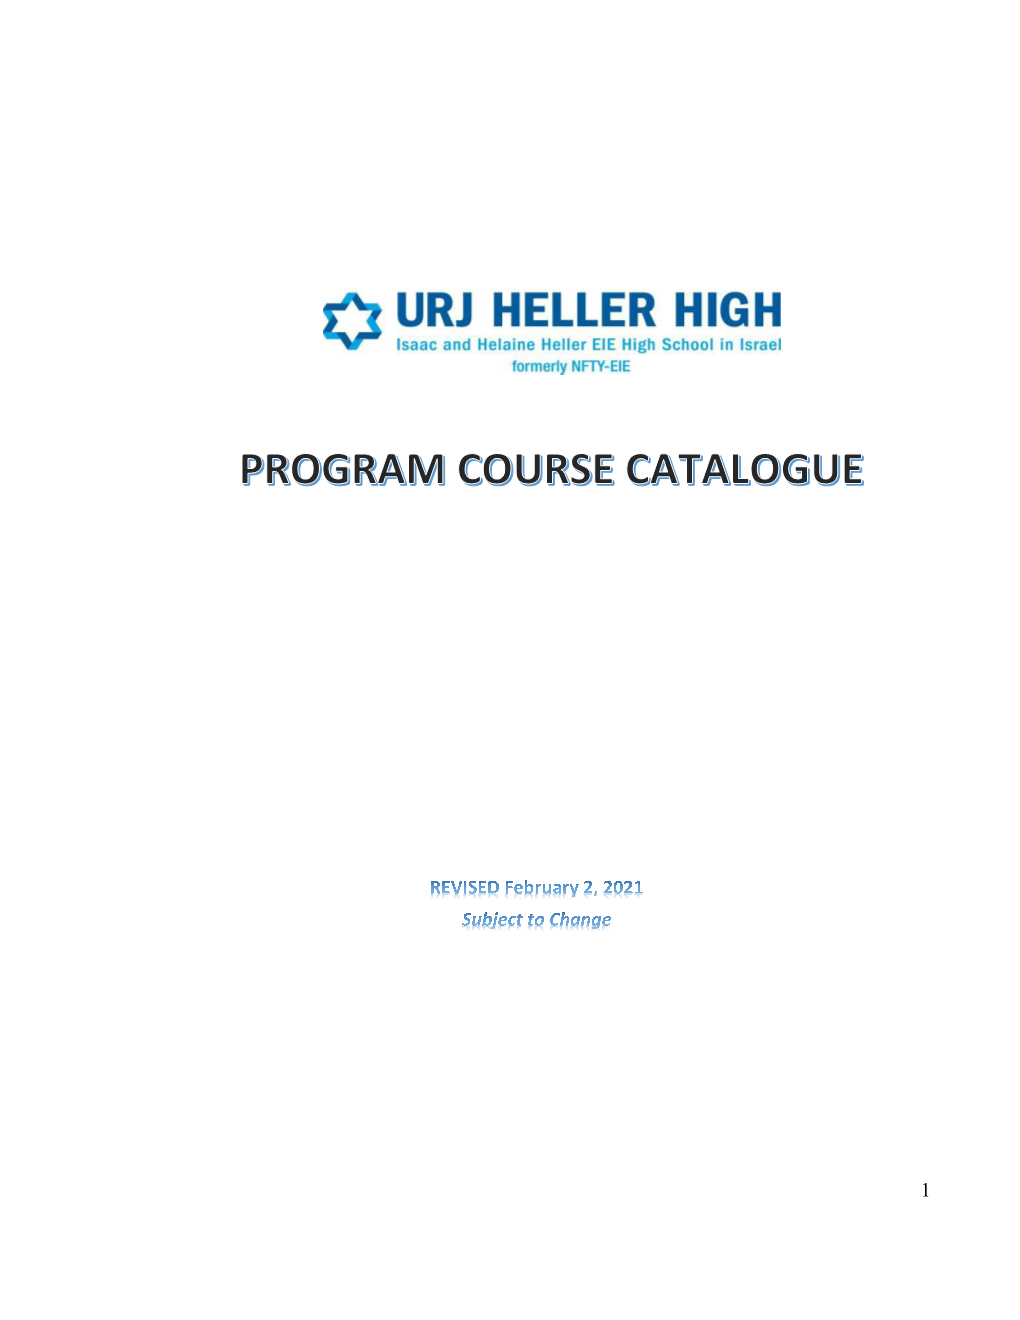 Program Course Catalogue Table of Contents